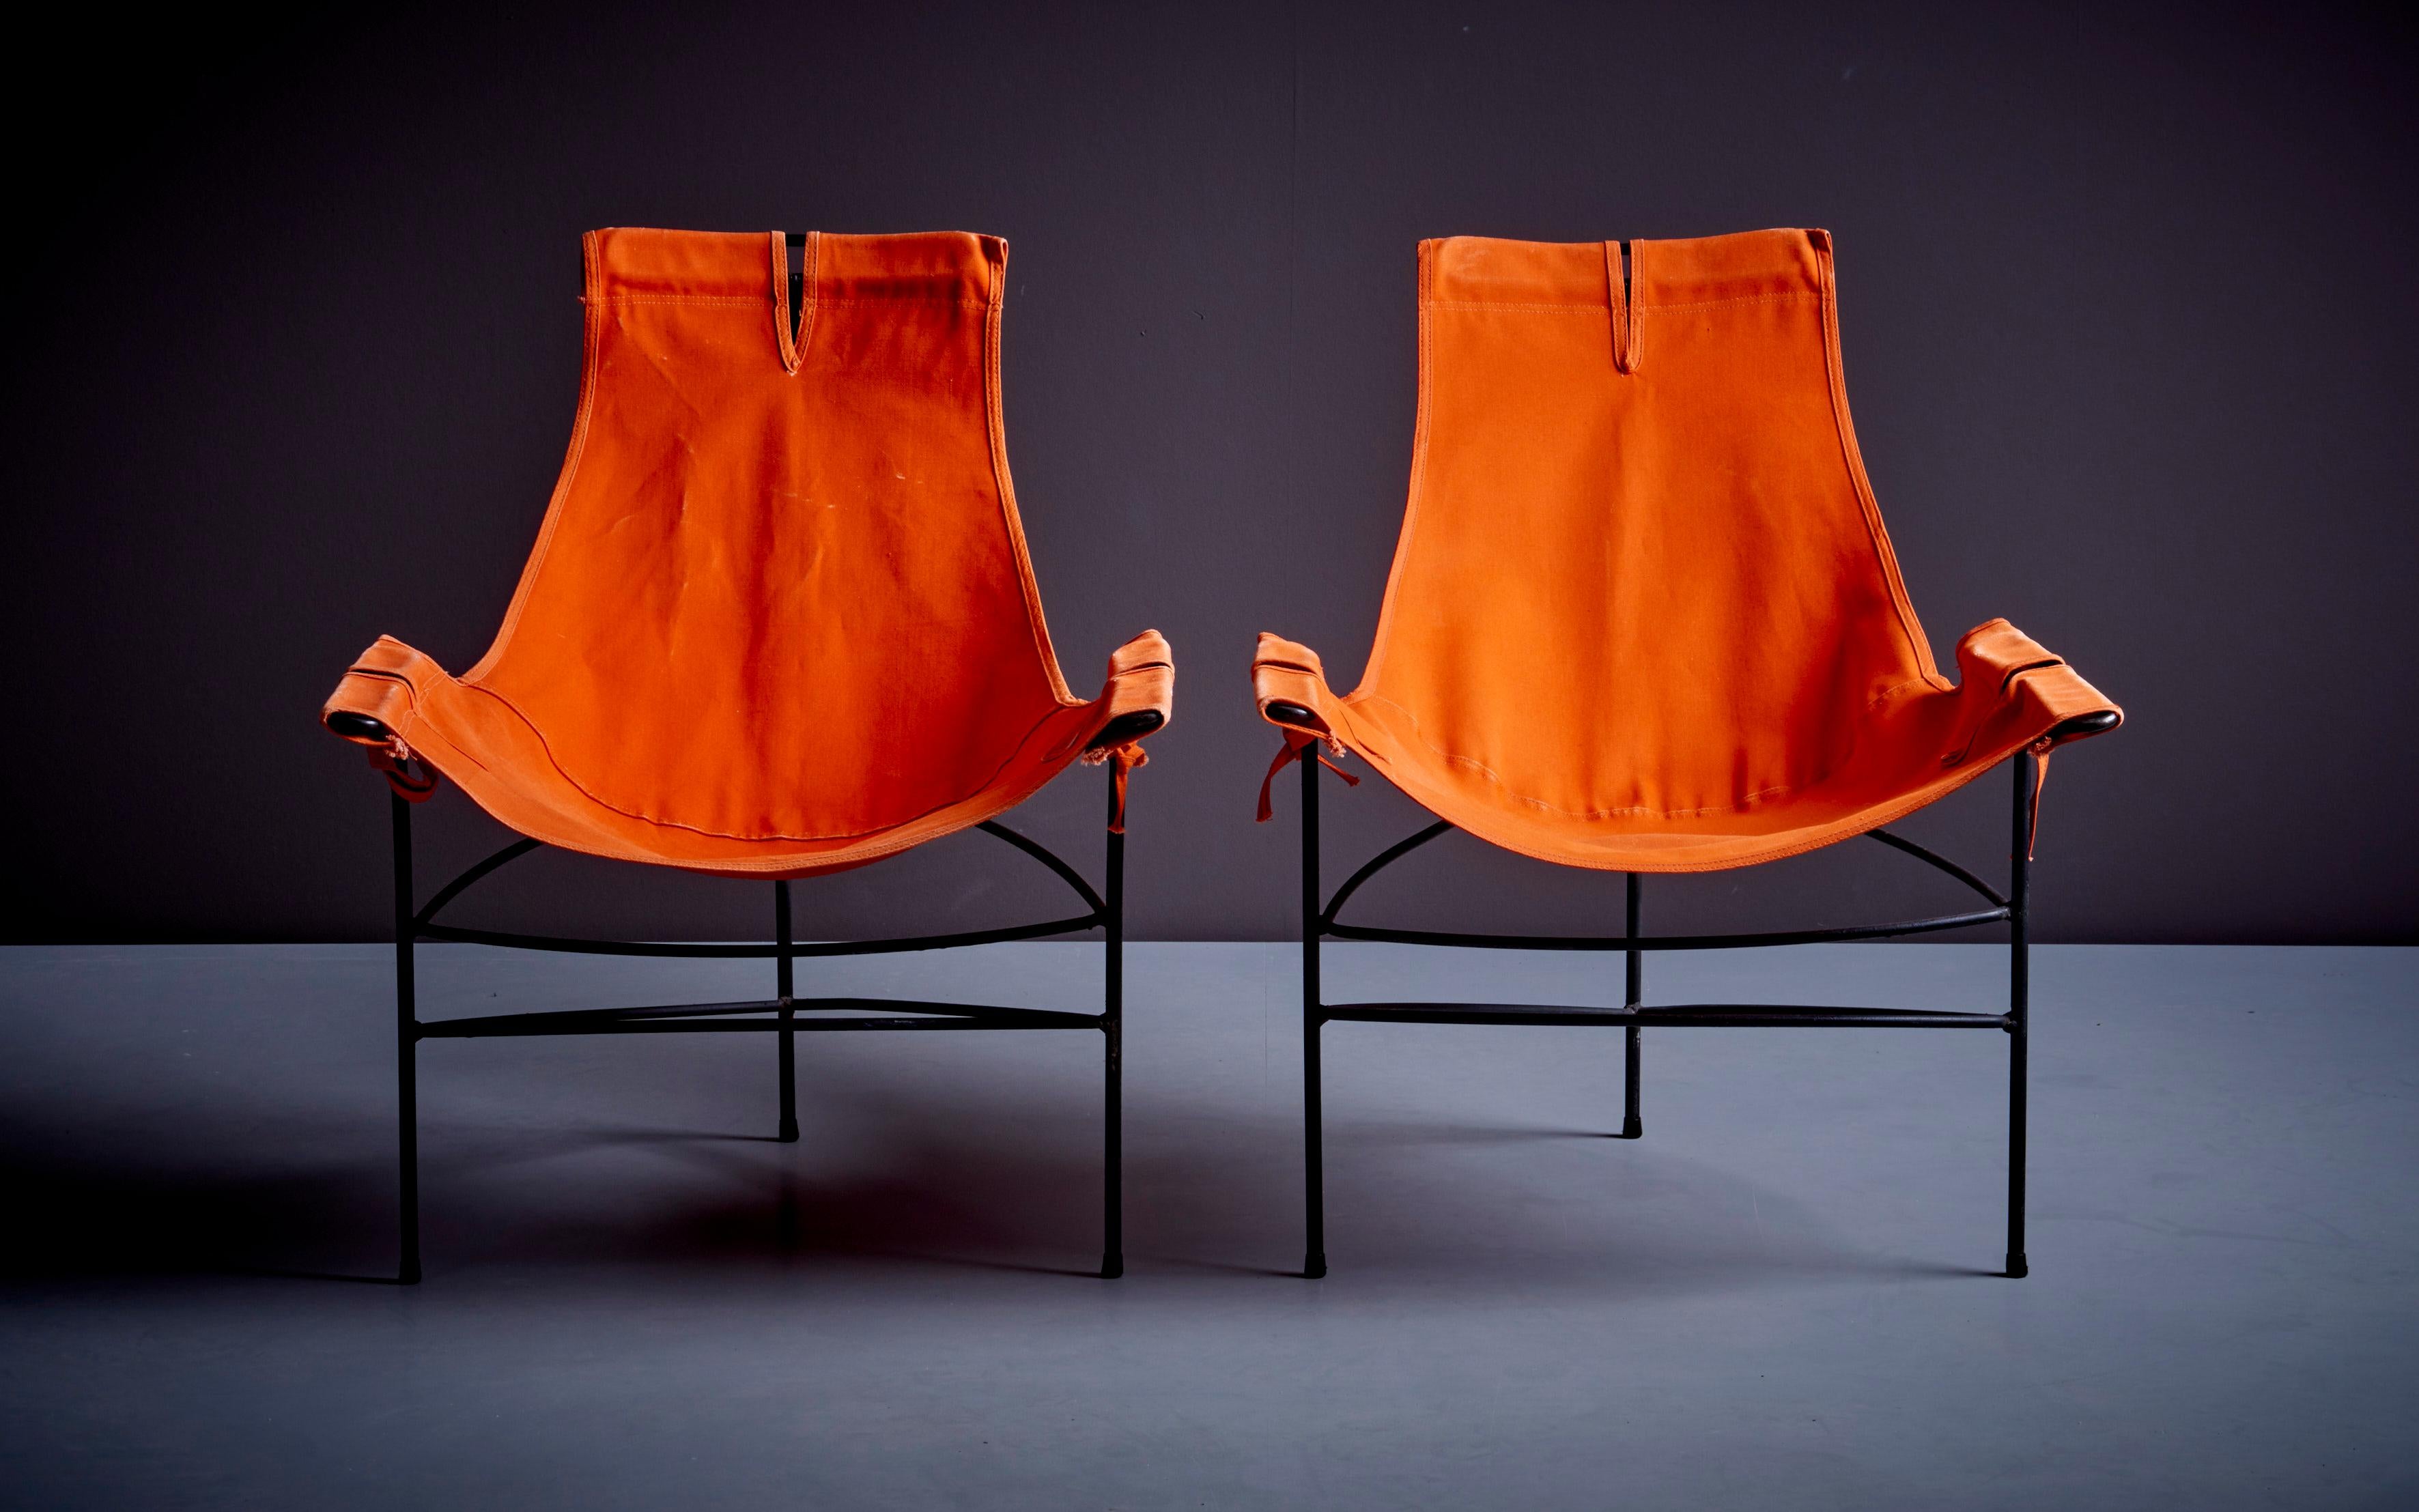 Pair of 2 Lounge Chairs by Jerry Johnson in Orange Canvas, USA, 1950s For Sale 1